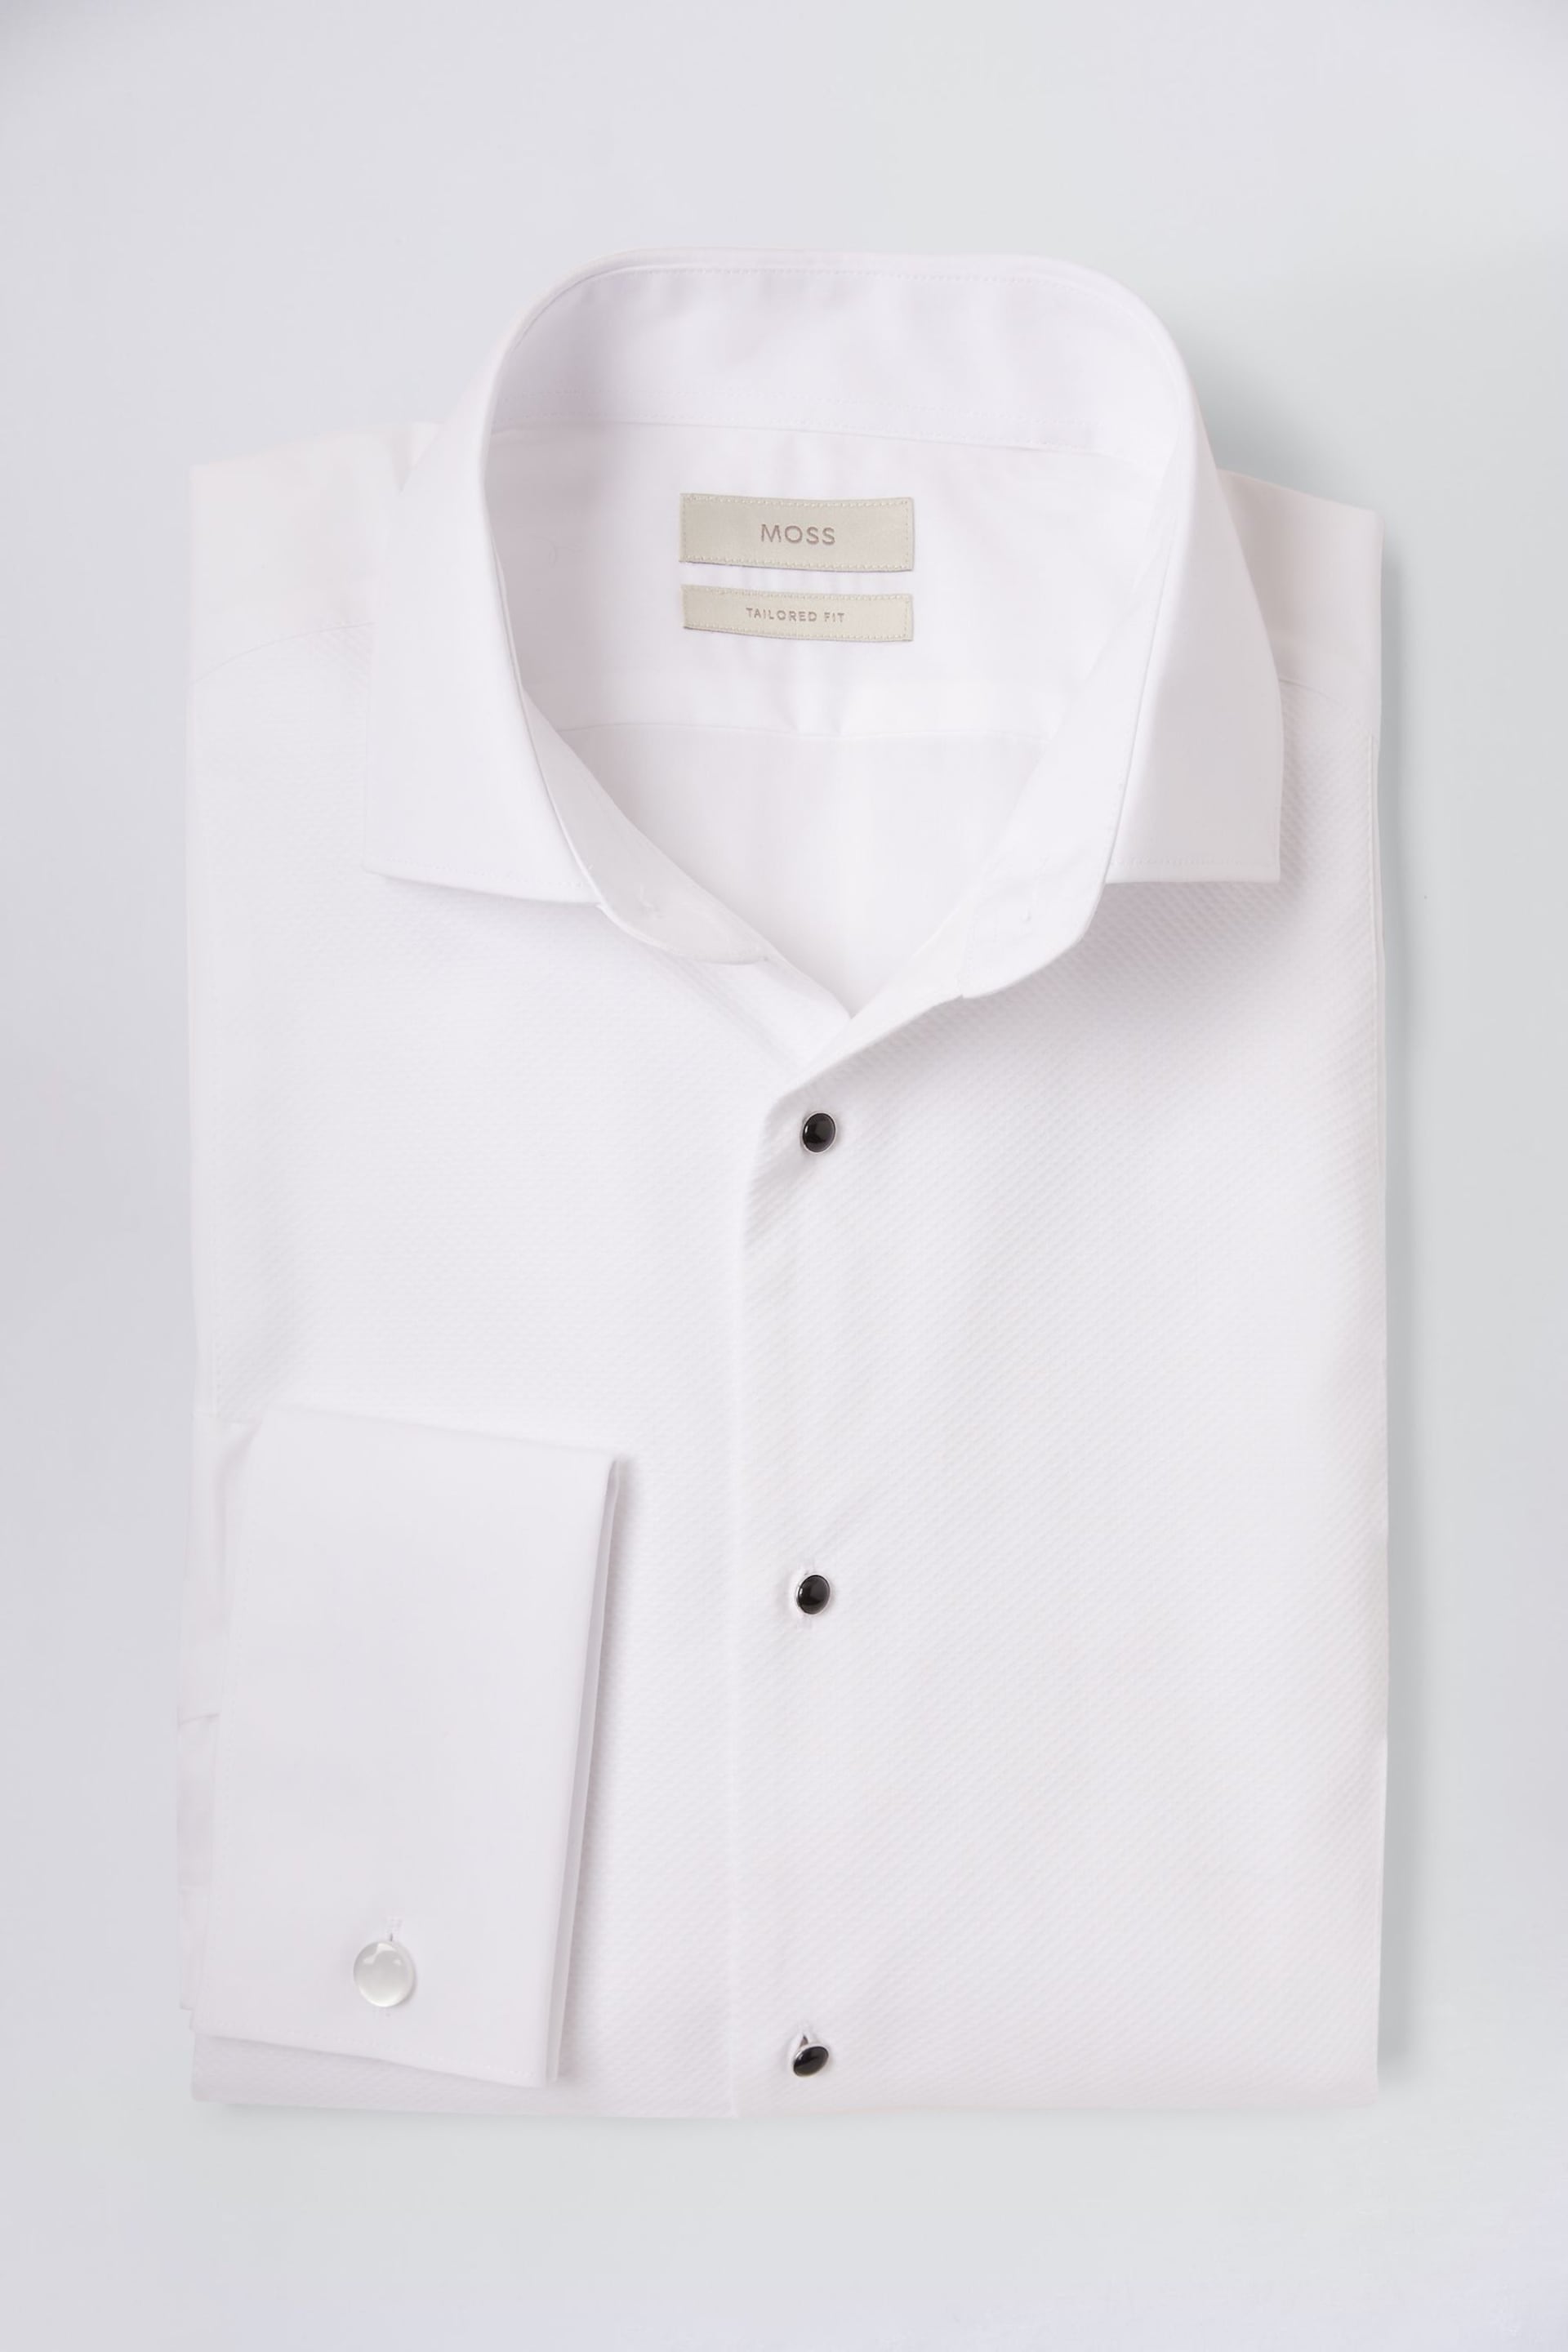 MOSS White Tailored Marcella Dress Shirt - Image 4 of 7